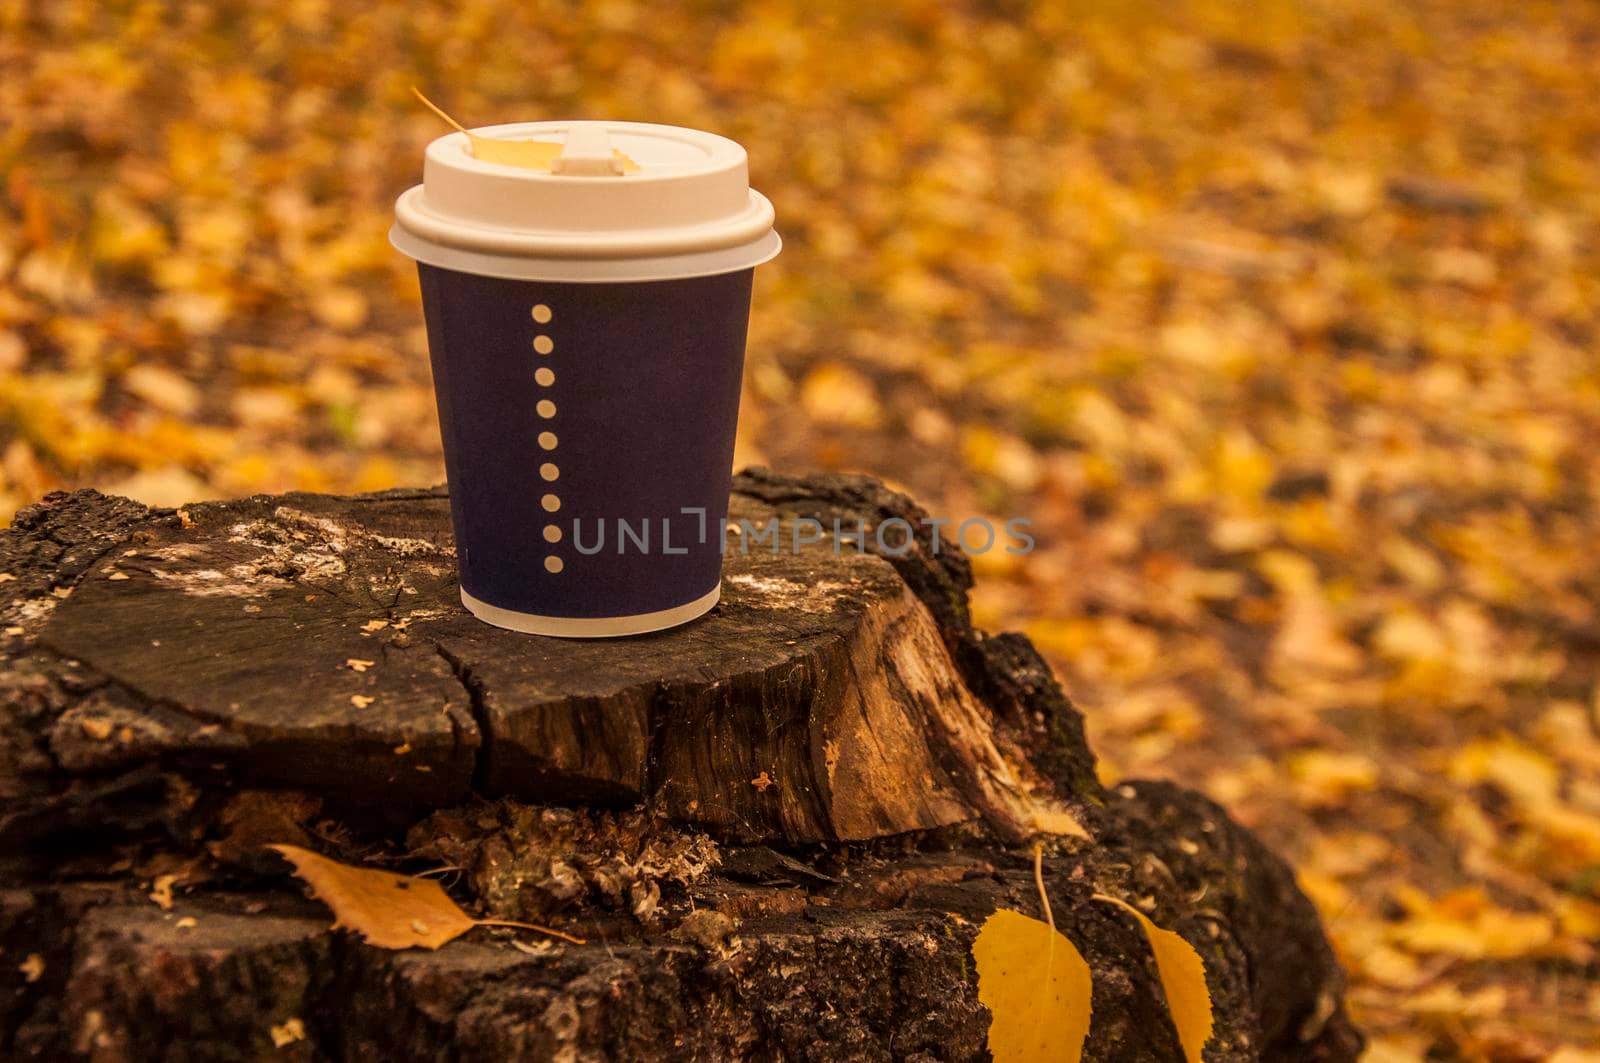 Disposable coffee or tea mug on a old stump in the autumn park. Warm up with aromatic coffee.